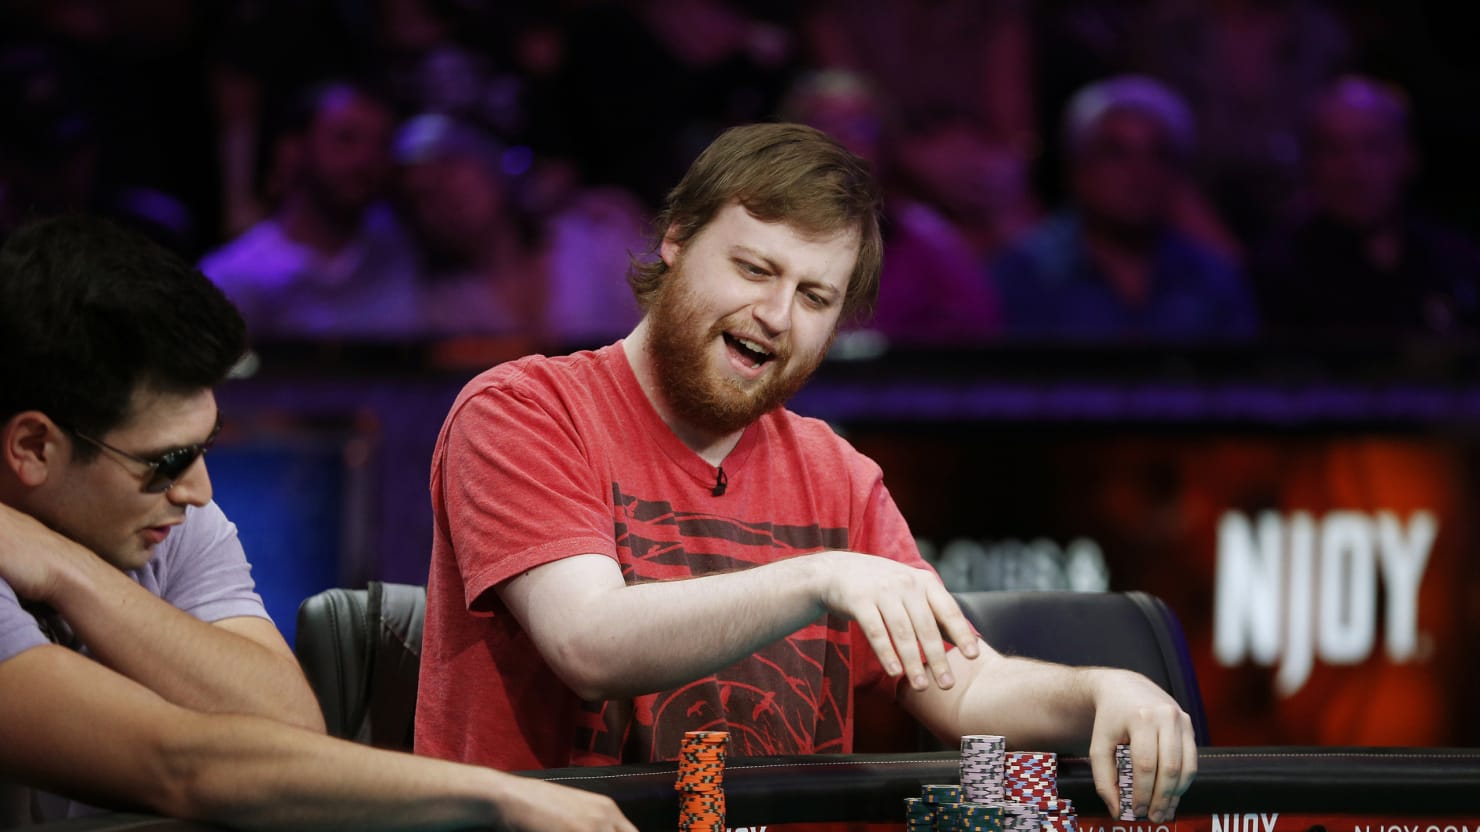 Poker's New Whiz Kid Is Just Like You